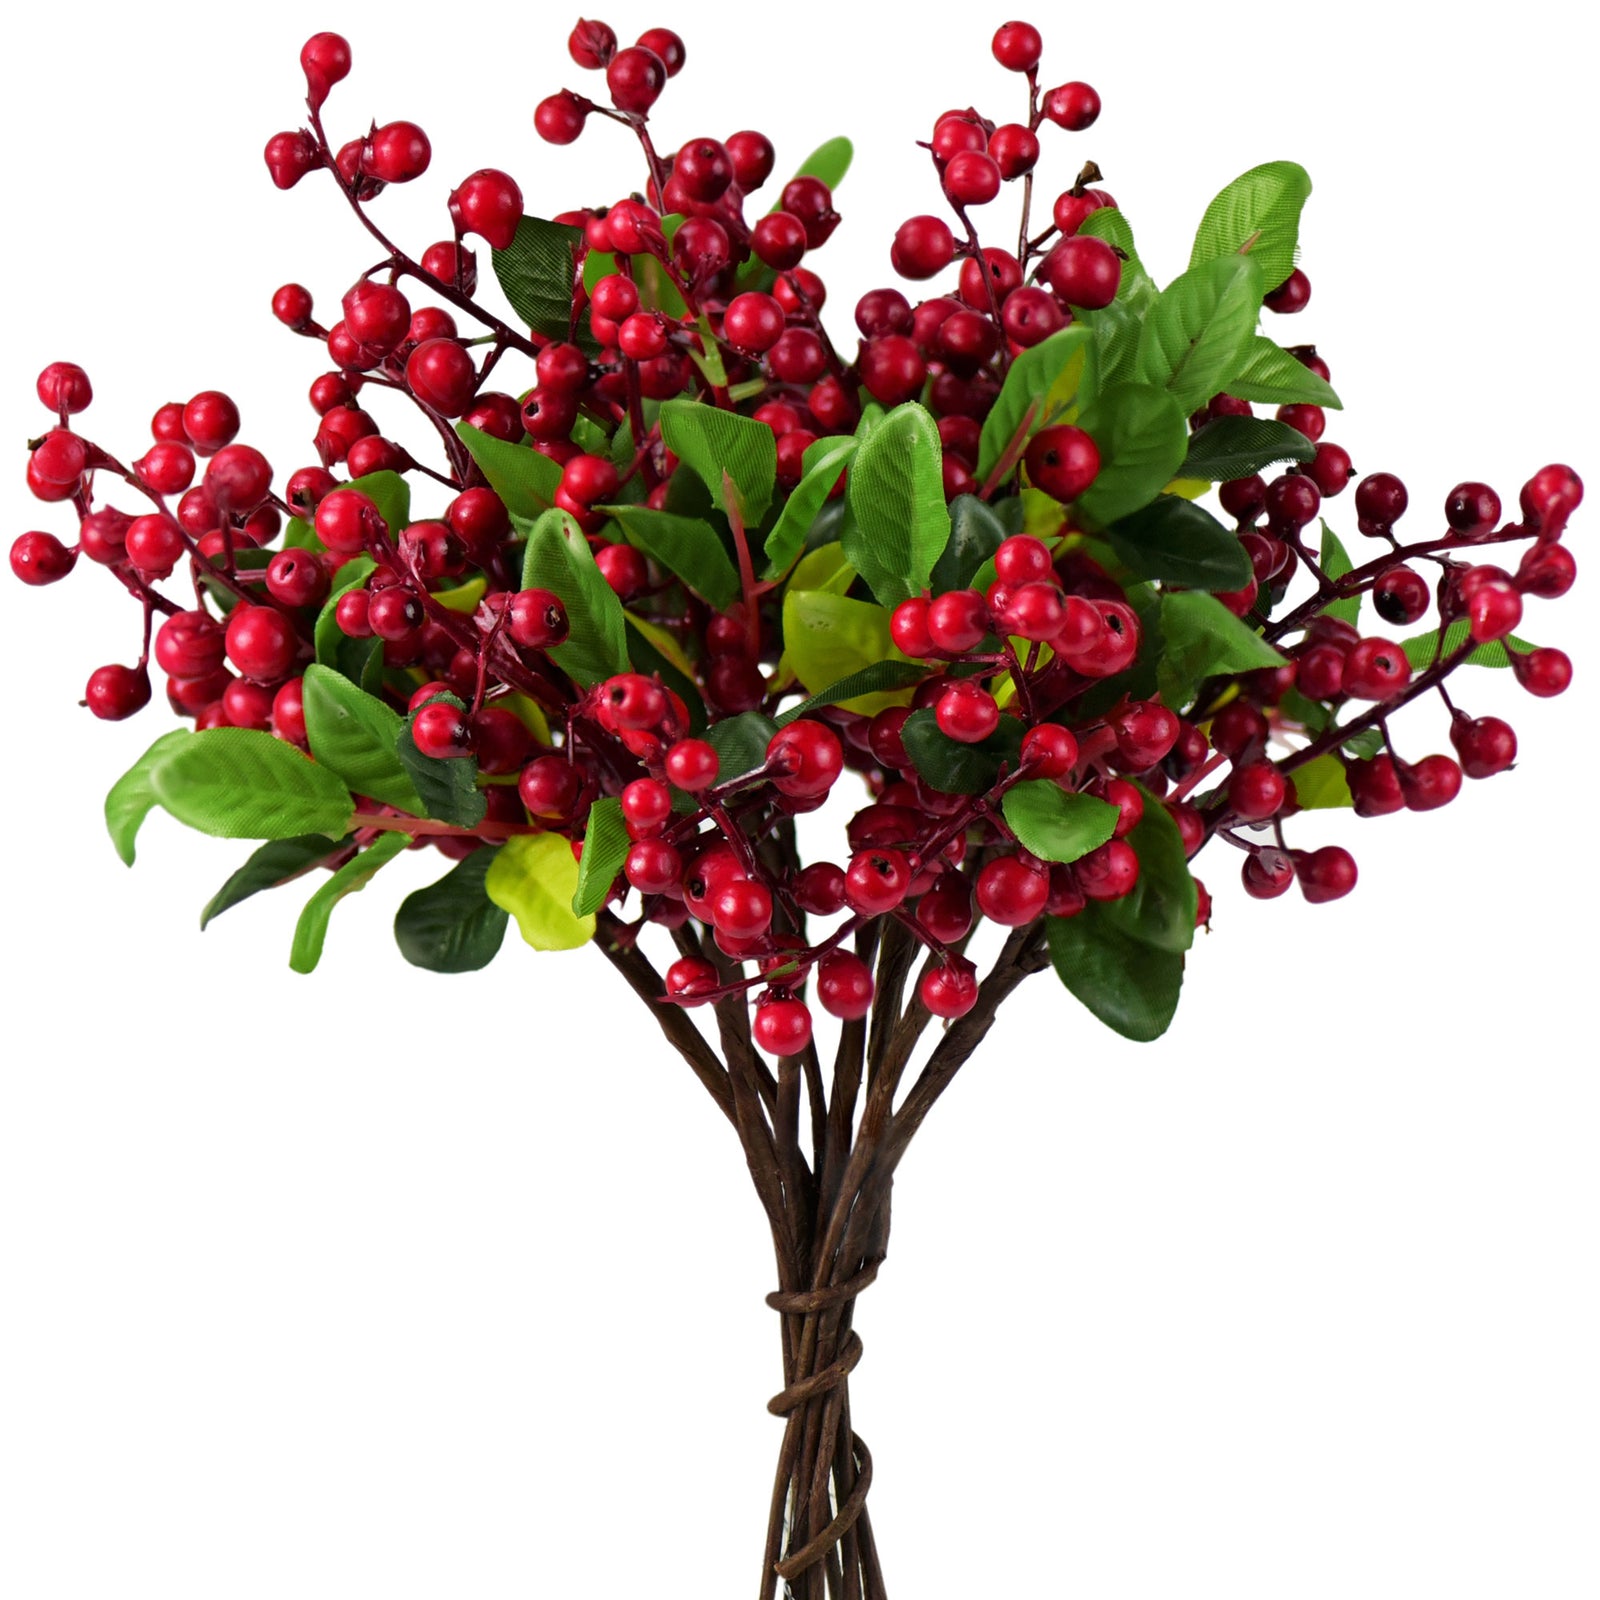 Festive Joyful Artificial Holly Red Berry Stems for the Holidays: Set of 10 for Stunning Décor